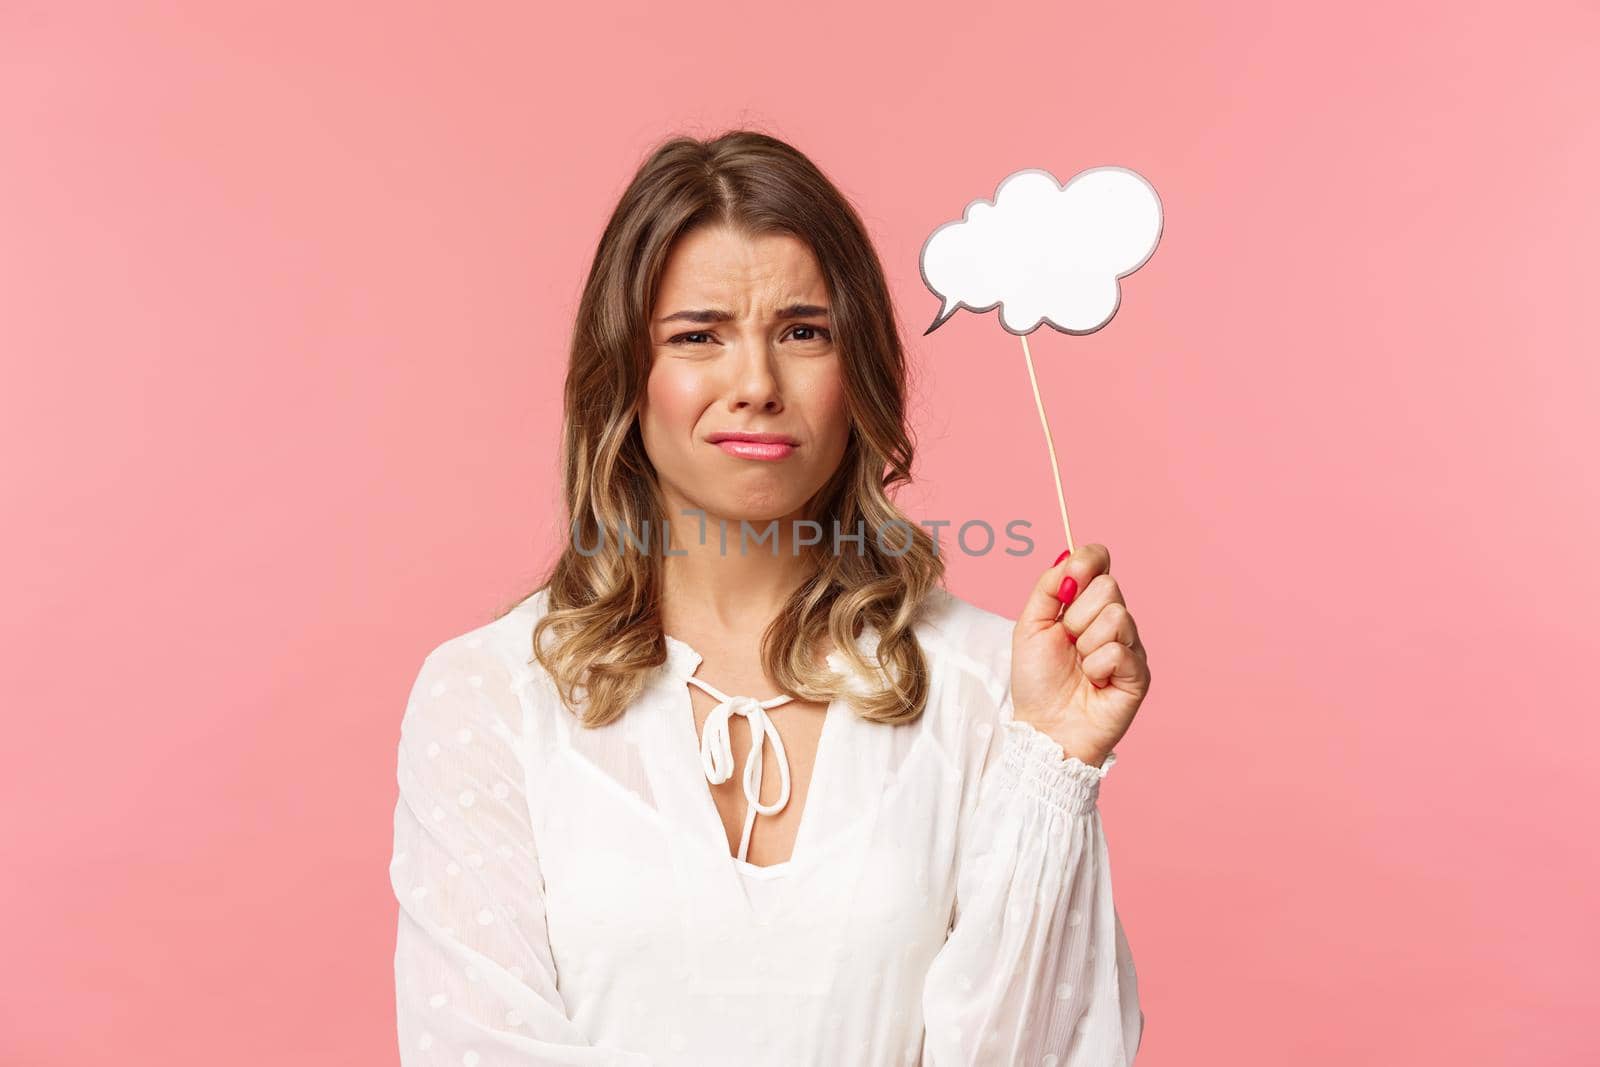 Spring, happiness and celebration concept. Close-up portrait of skeptical and hesitant young blond girl express dislike or reluctance, holding commend cloud stick near head, grimacing disappointed.